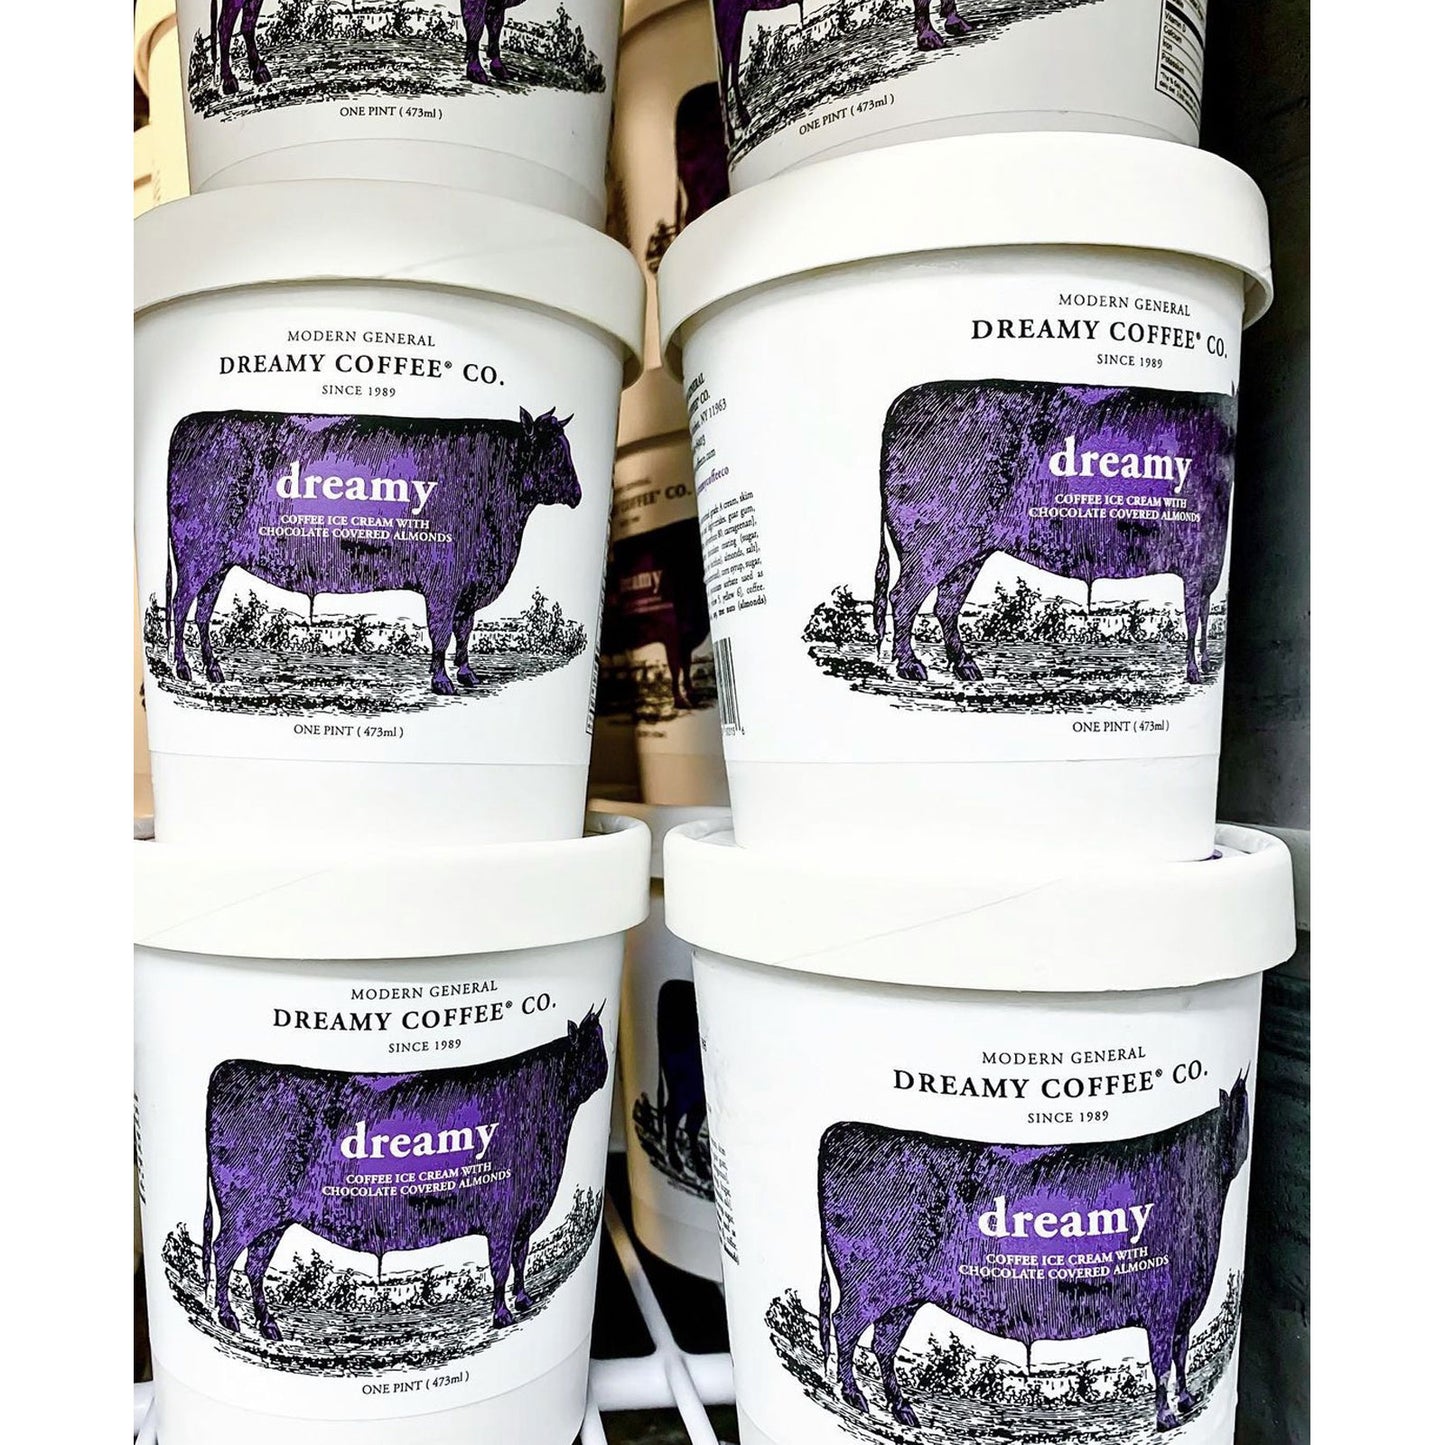 Modern General Dreamy Coffee® Co. 'Dreamy' Ice Cream, Pint (Pick Up Only)